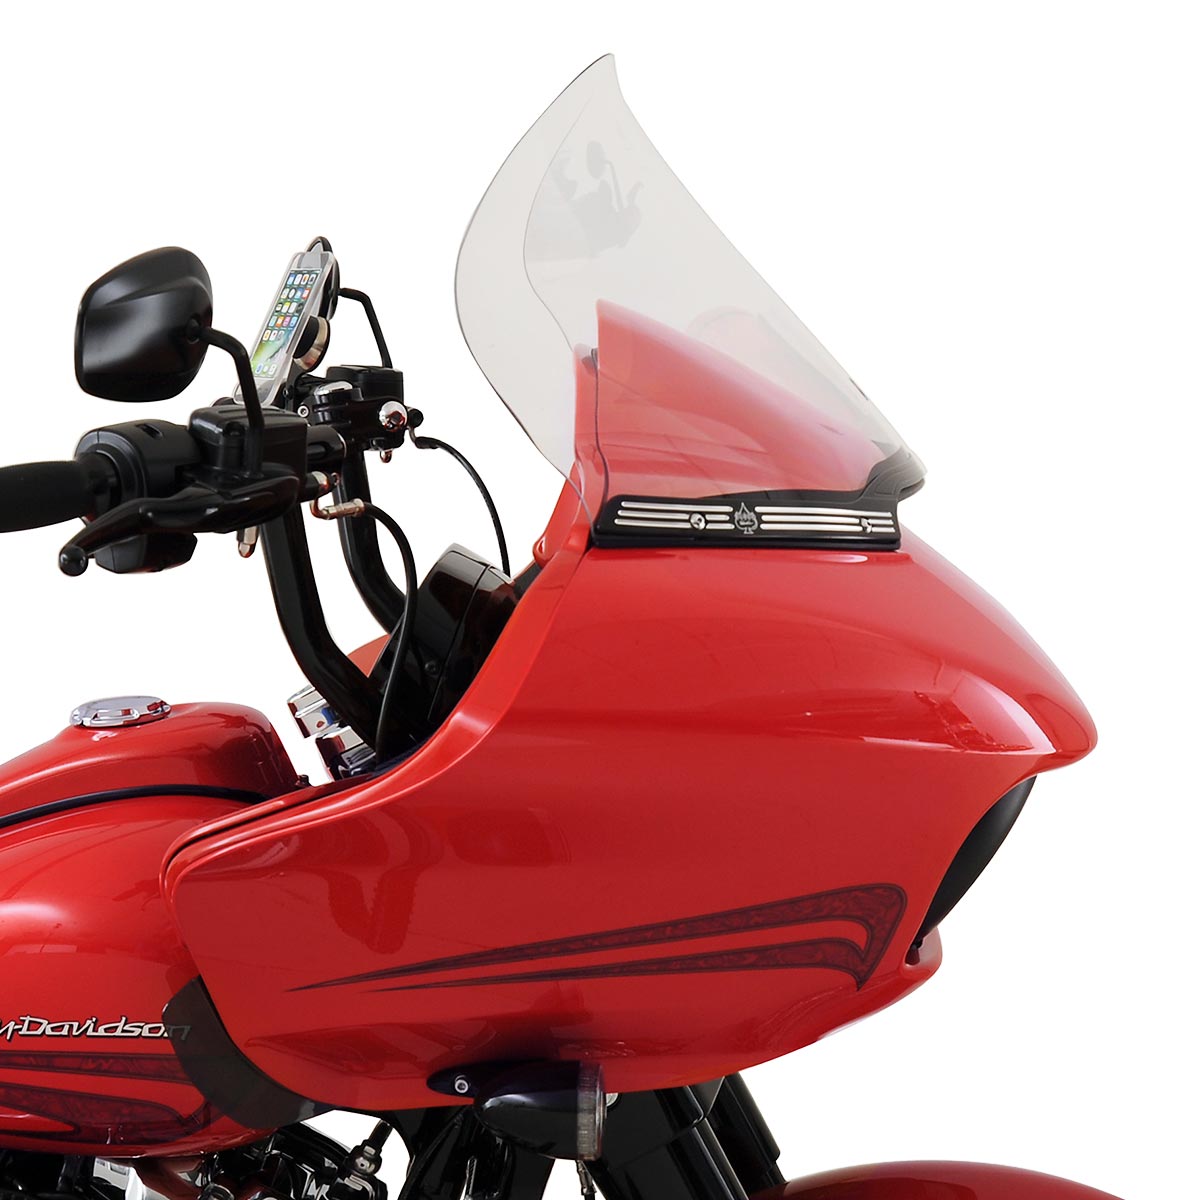 15" Pro-Touring Clear Flare™ Windshields for Harley-Davidson 2015-2023 Road Glide motorcycle models(15" Pro-Touring - Clear)